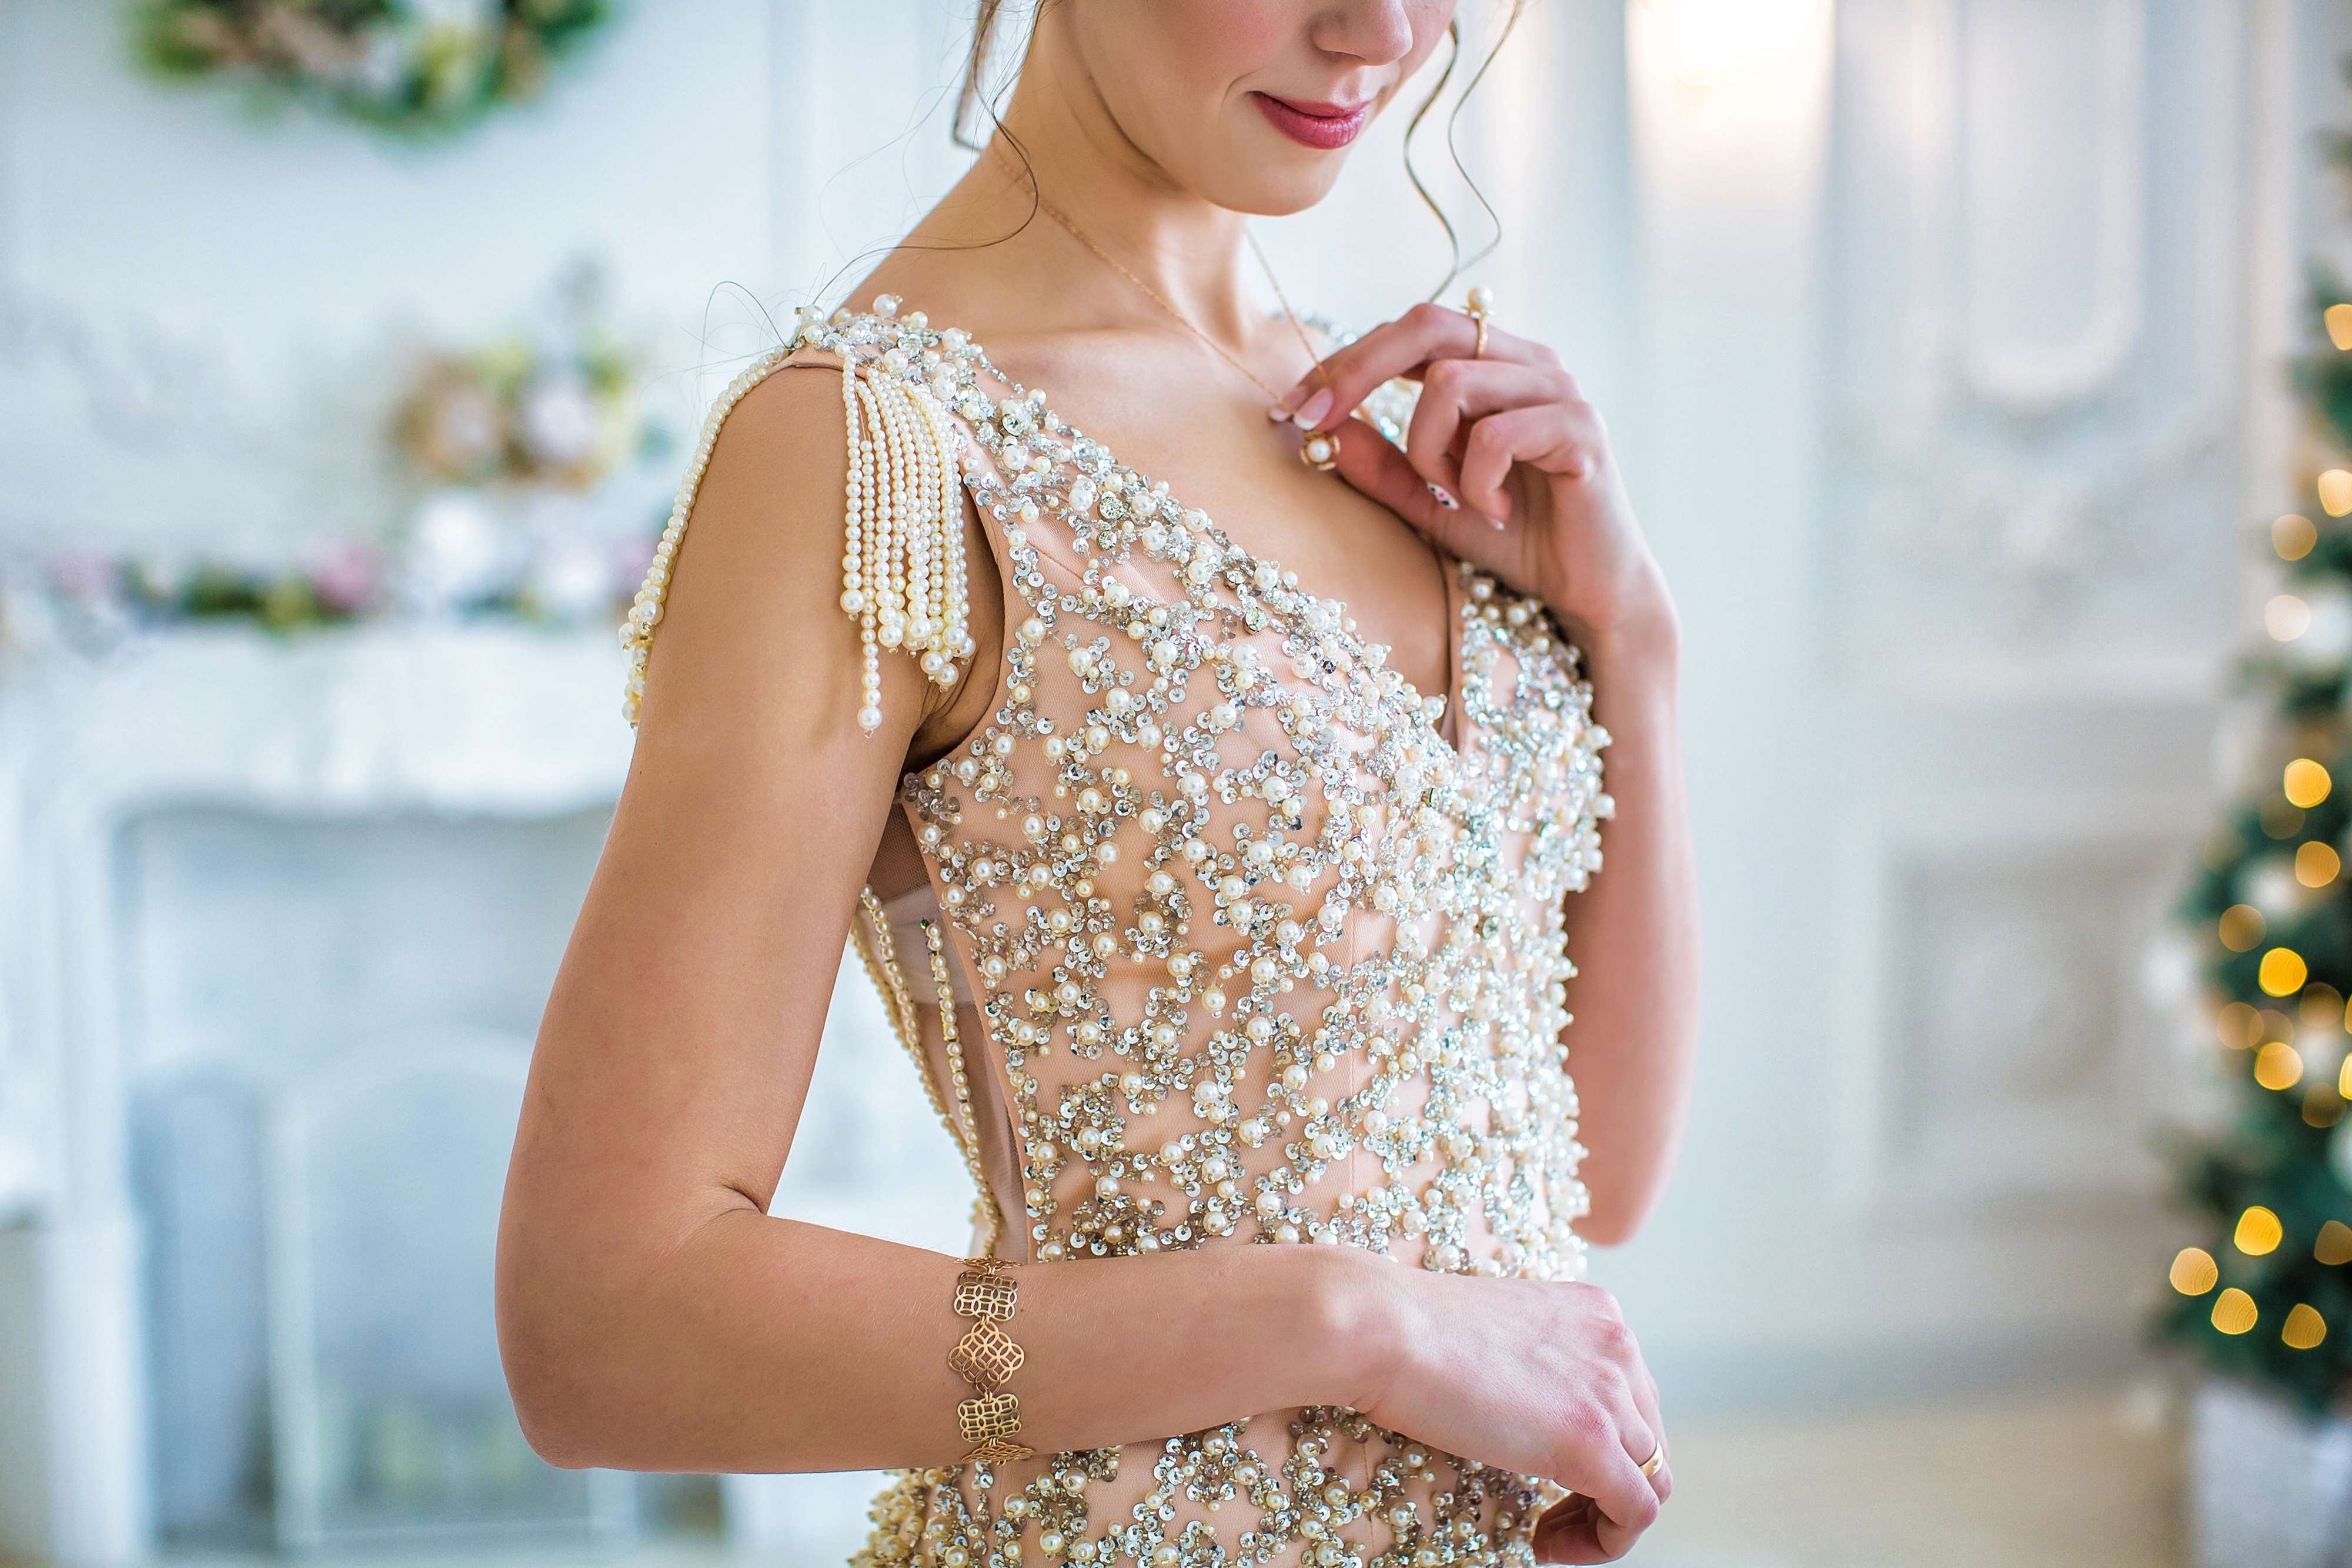 don't buy knock-off prom dresses